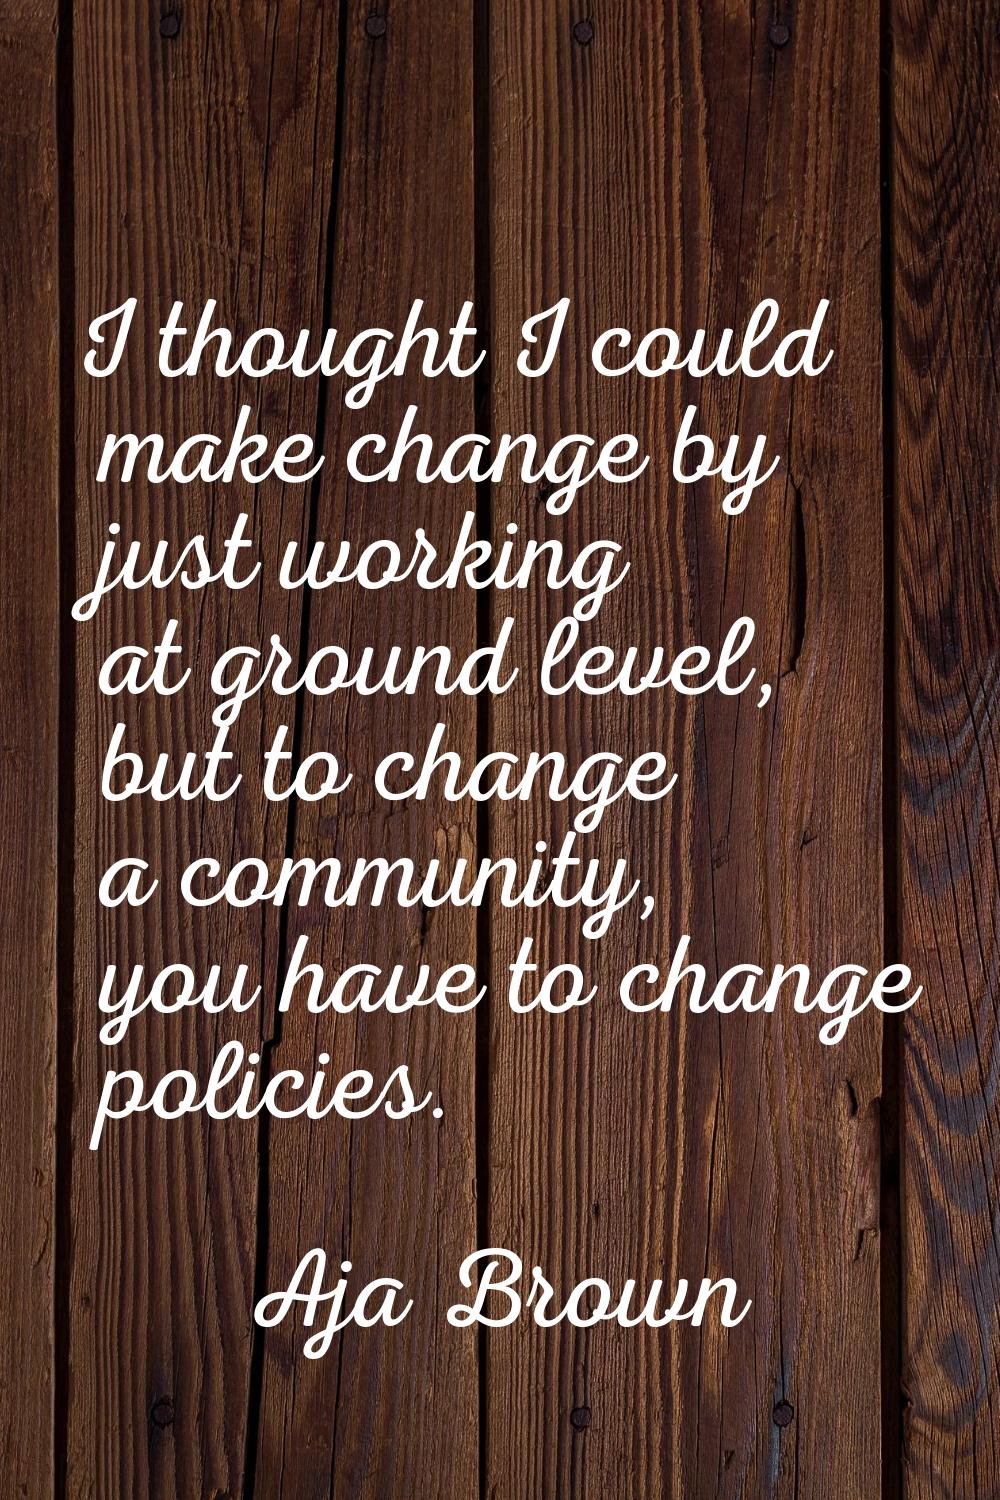 I thought I could make change by just working at ground level, but to change a community, you have 